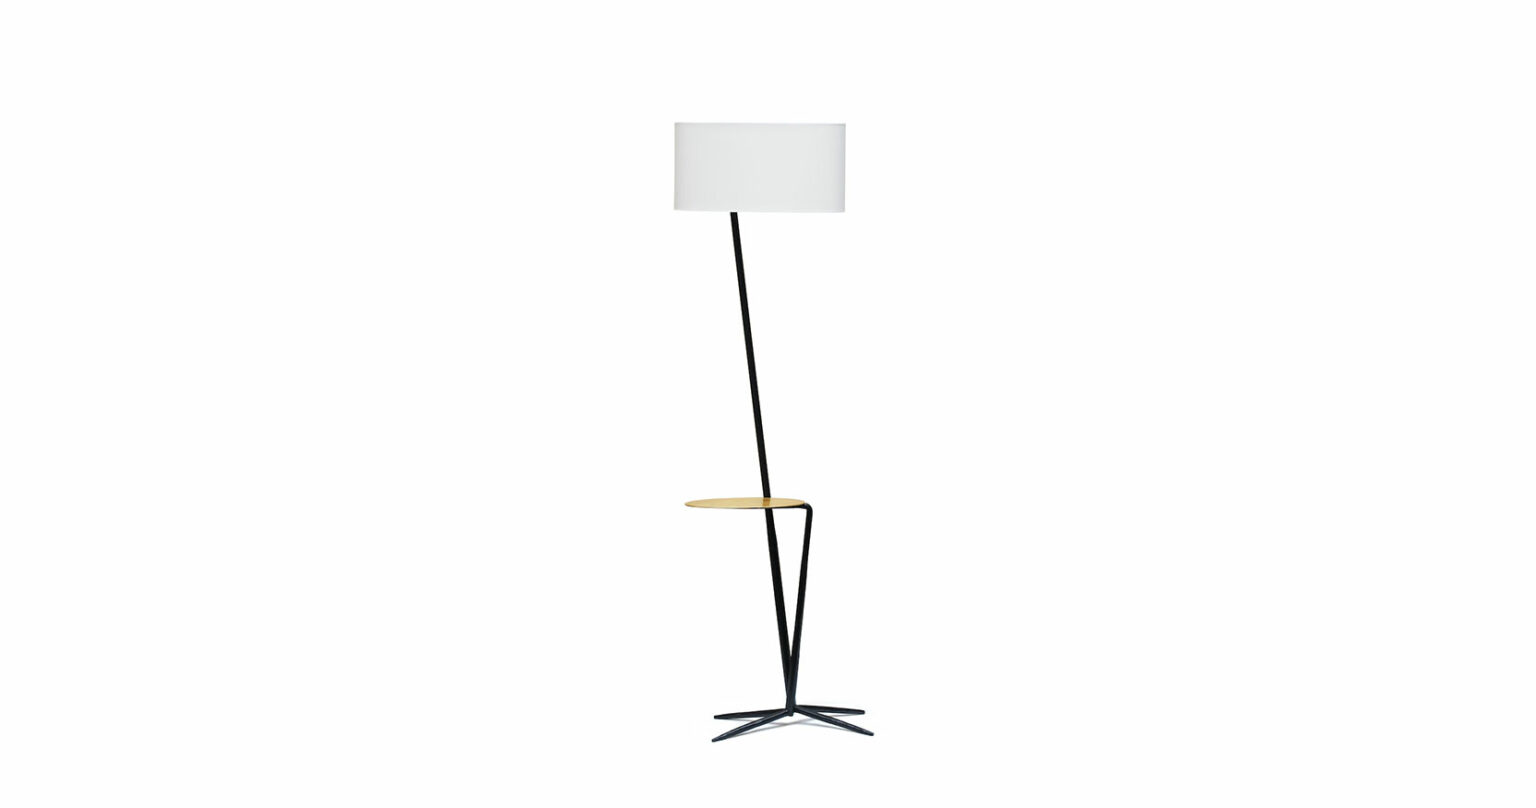 Eric Robin, graphic floor lamp, 4 horizontal legs in black wrought iron One stem with a golden oval shelf and another higher stem that holds a white oval lampshade